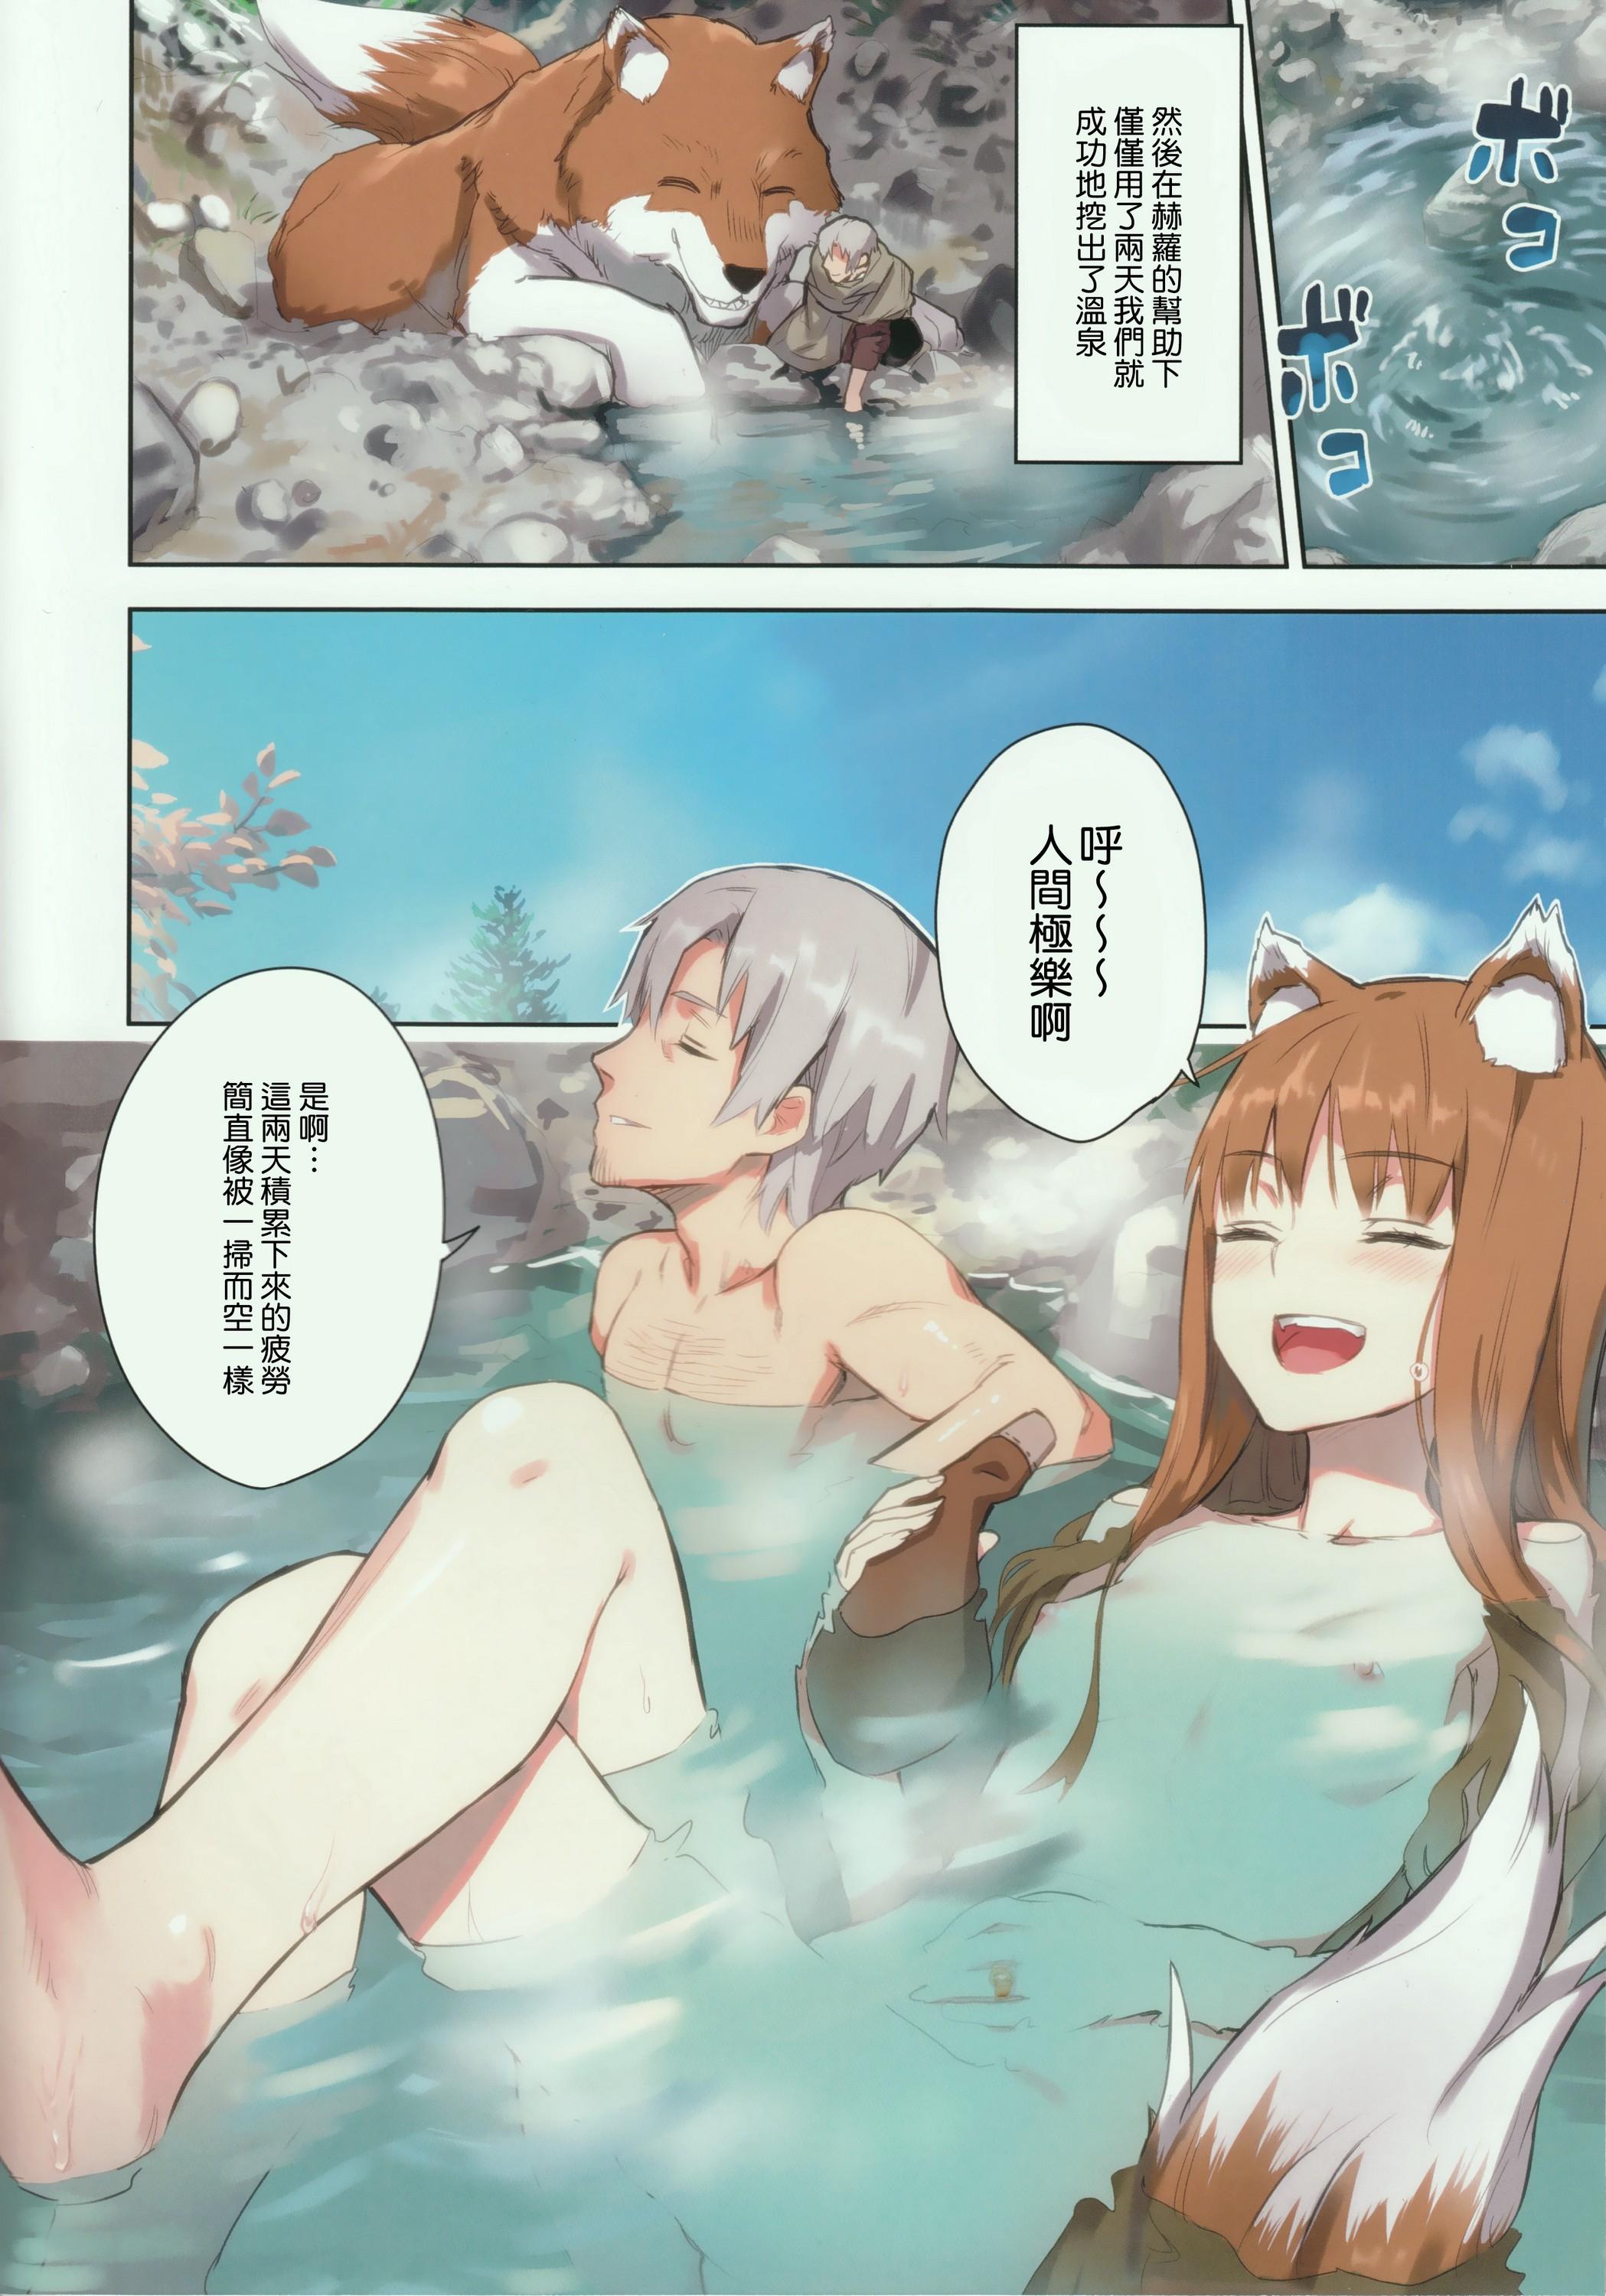 Gorda Wacchi to Nyohhira Bon FULL COLOR - Spice and wolf Spank - Page 8